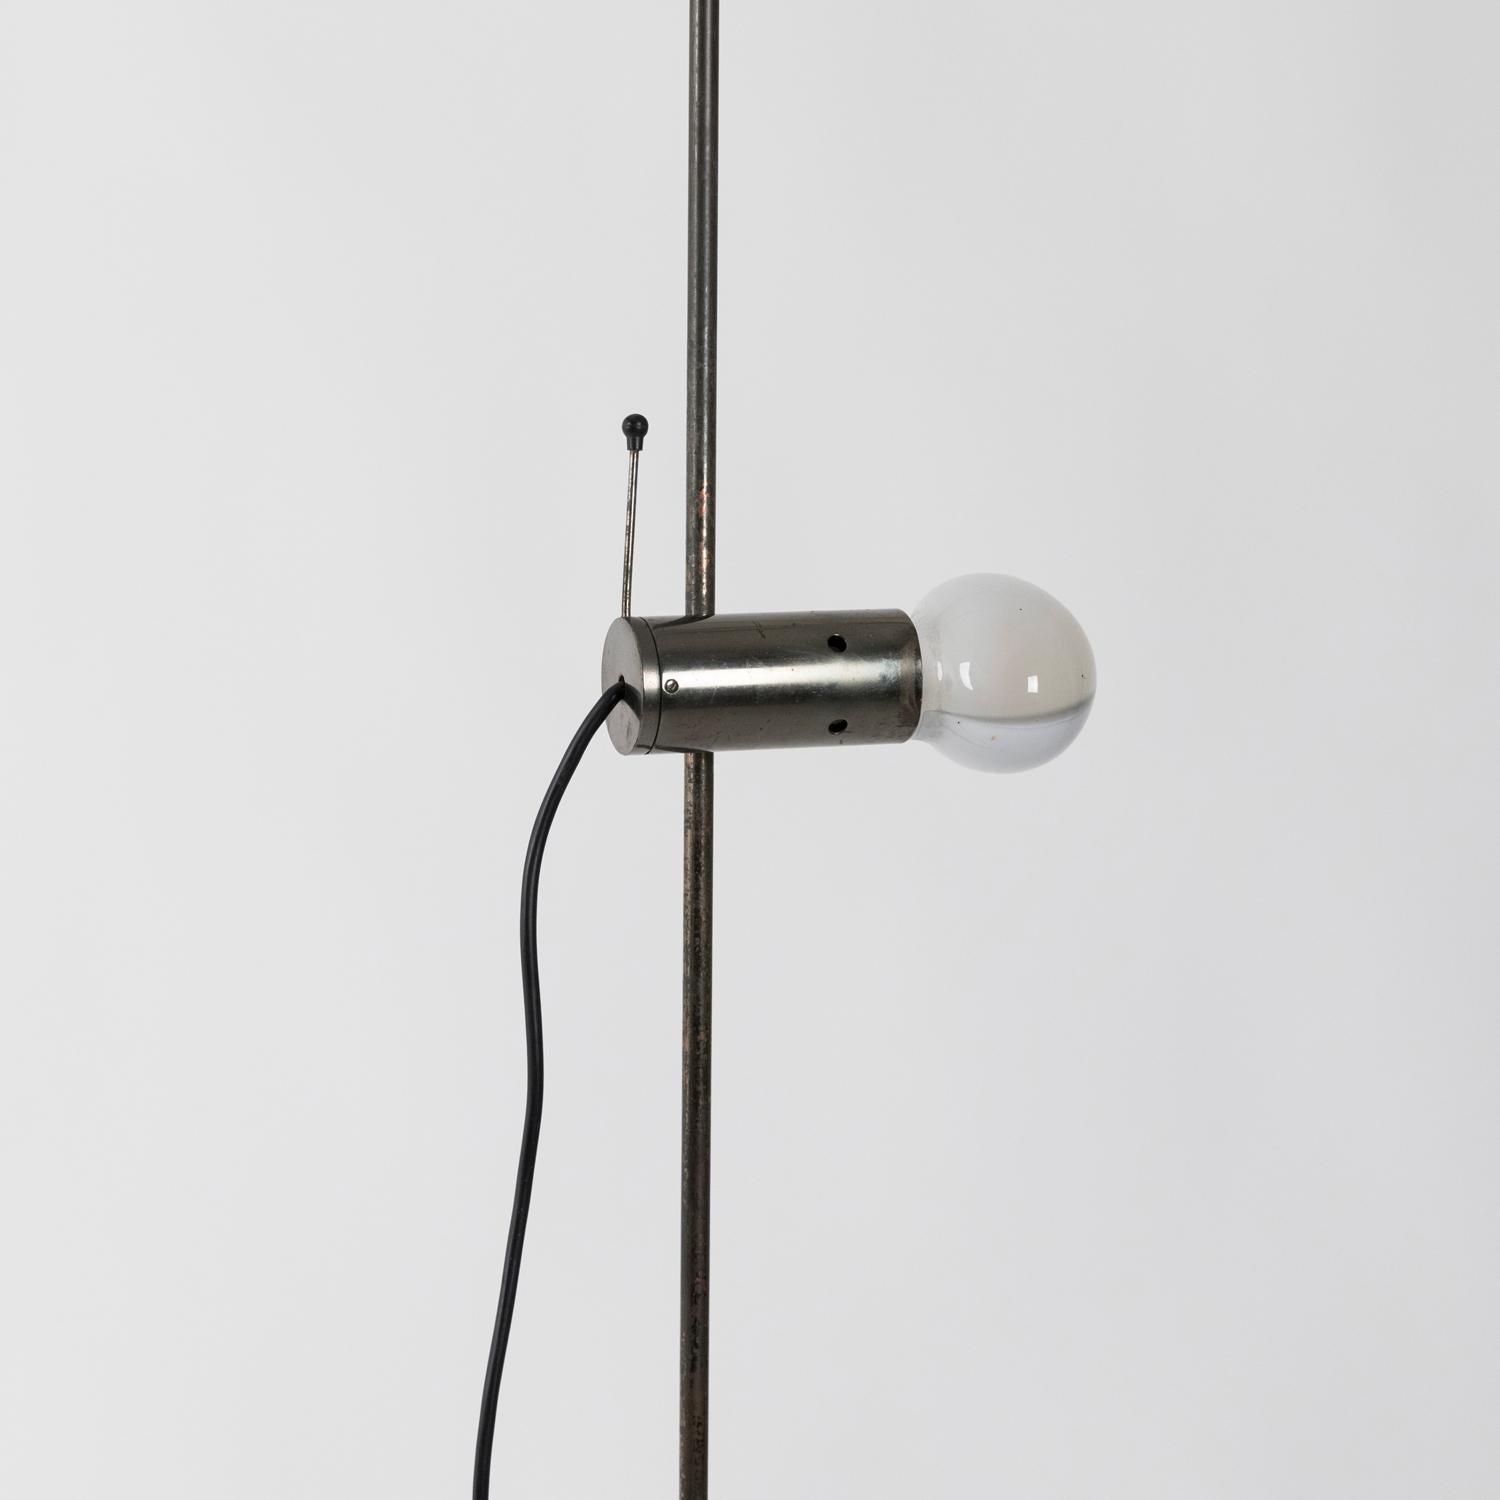 Mod.387 floor lamp designed in 1954 by Tito Agnoli for O-Luce in a rare bronzed version, travertine base. Light spot is pivoting and moves up and down along the stem.